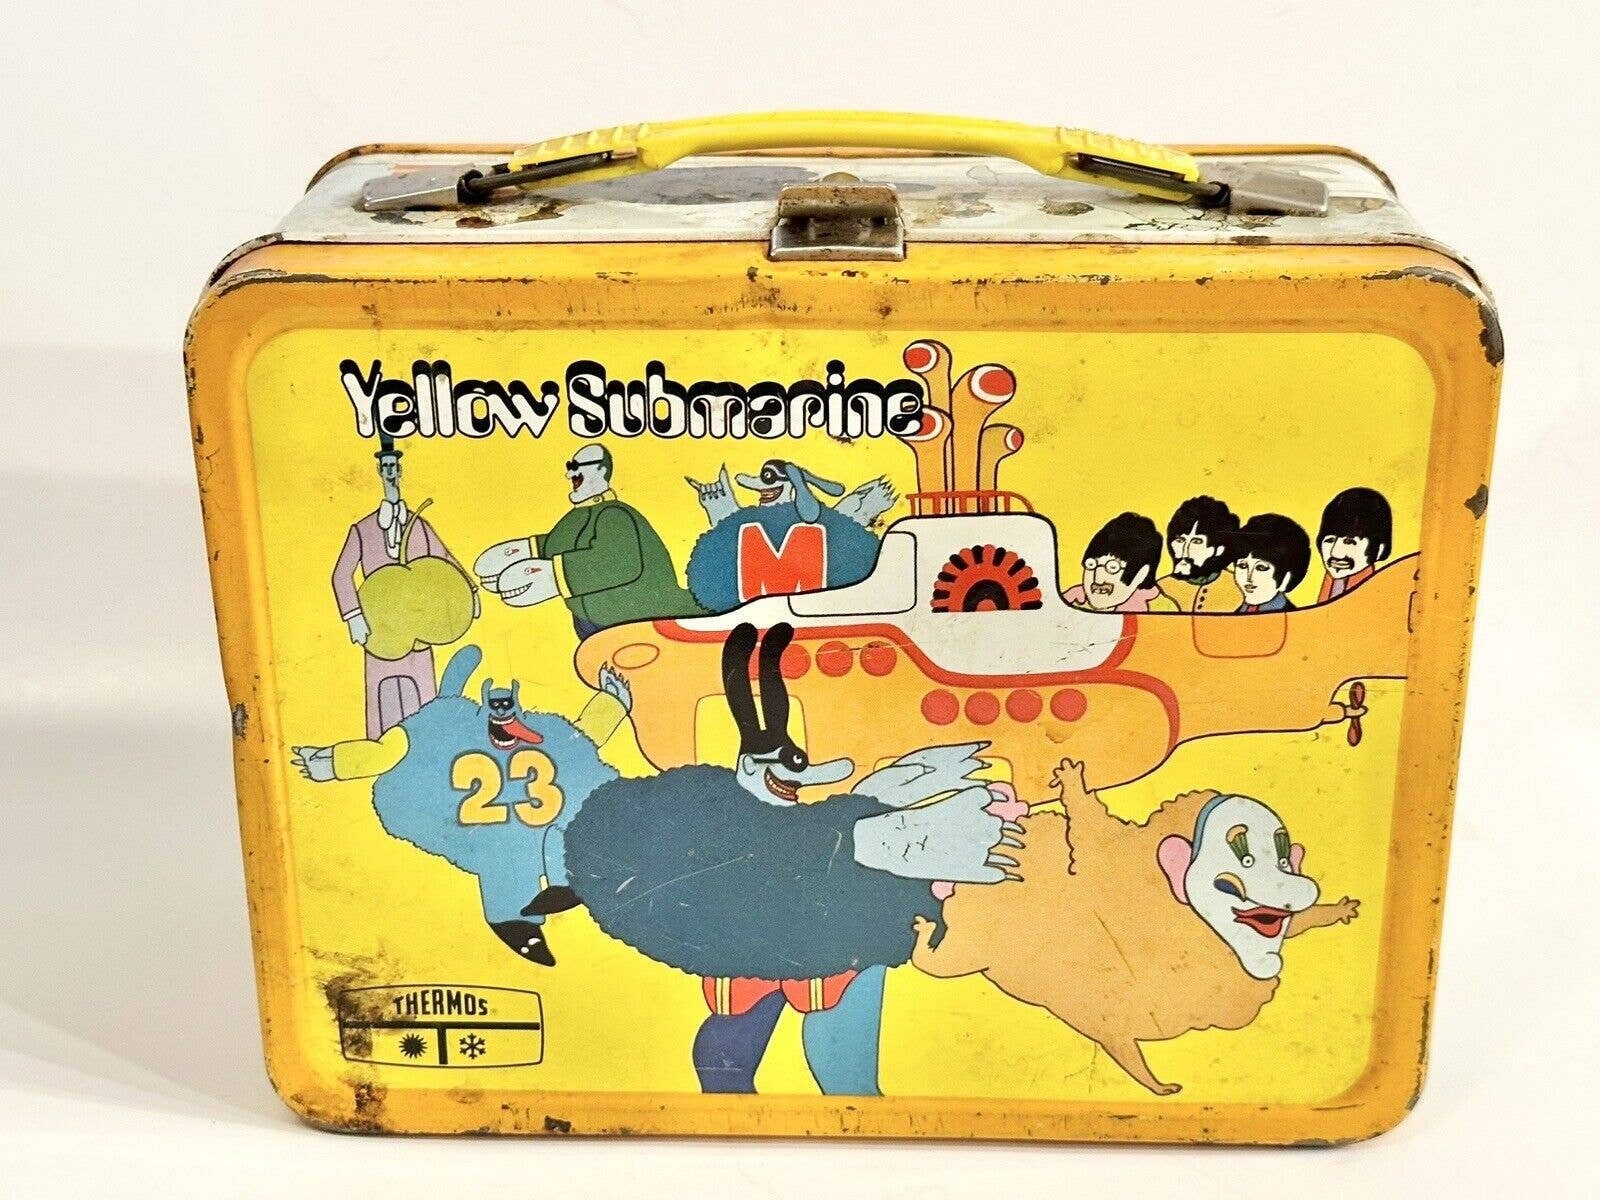  Beatles Original 1965 Lunchbox w/ Thermos (no cup) –